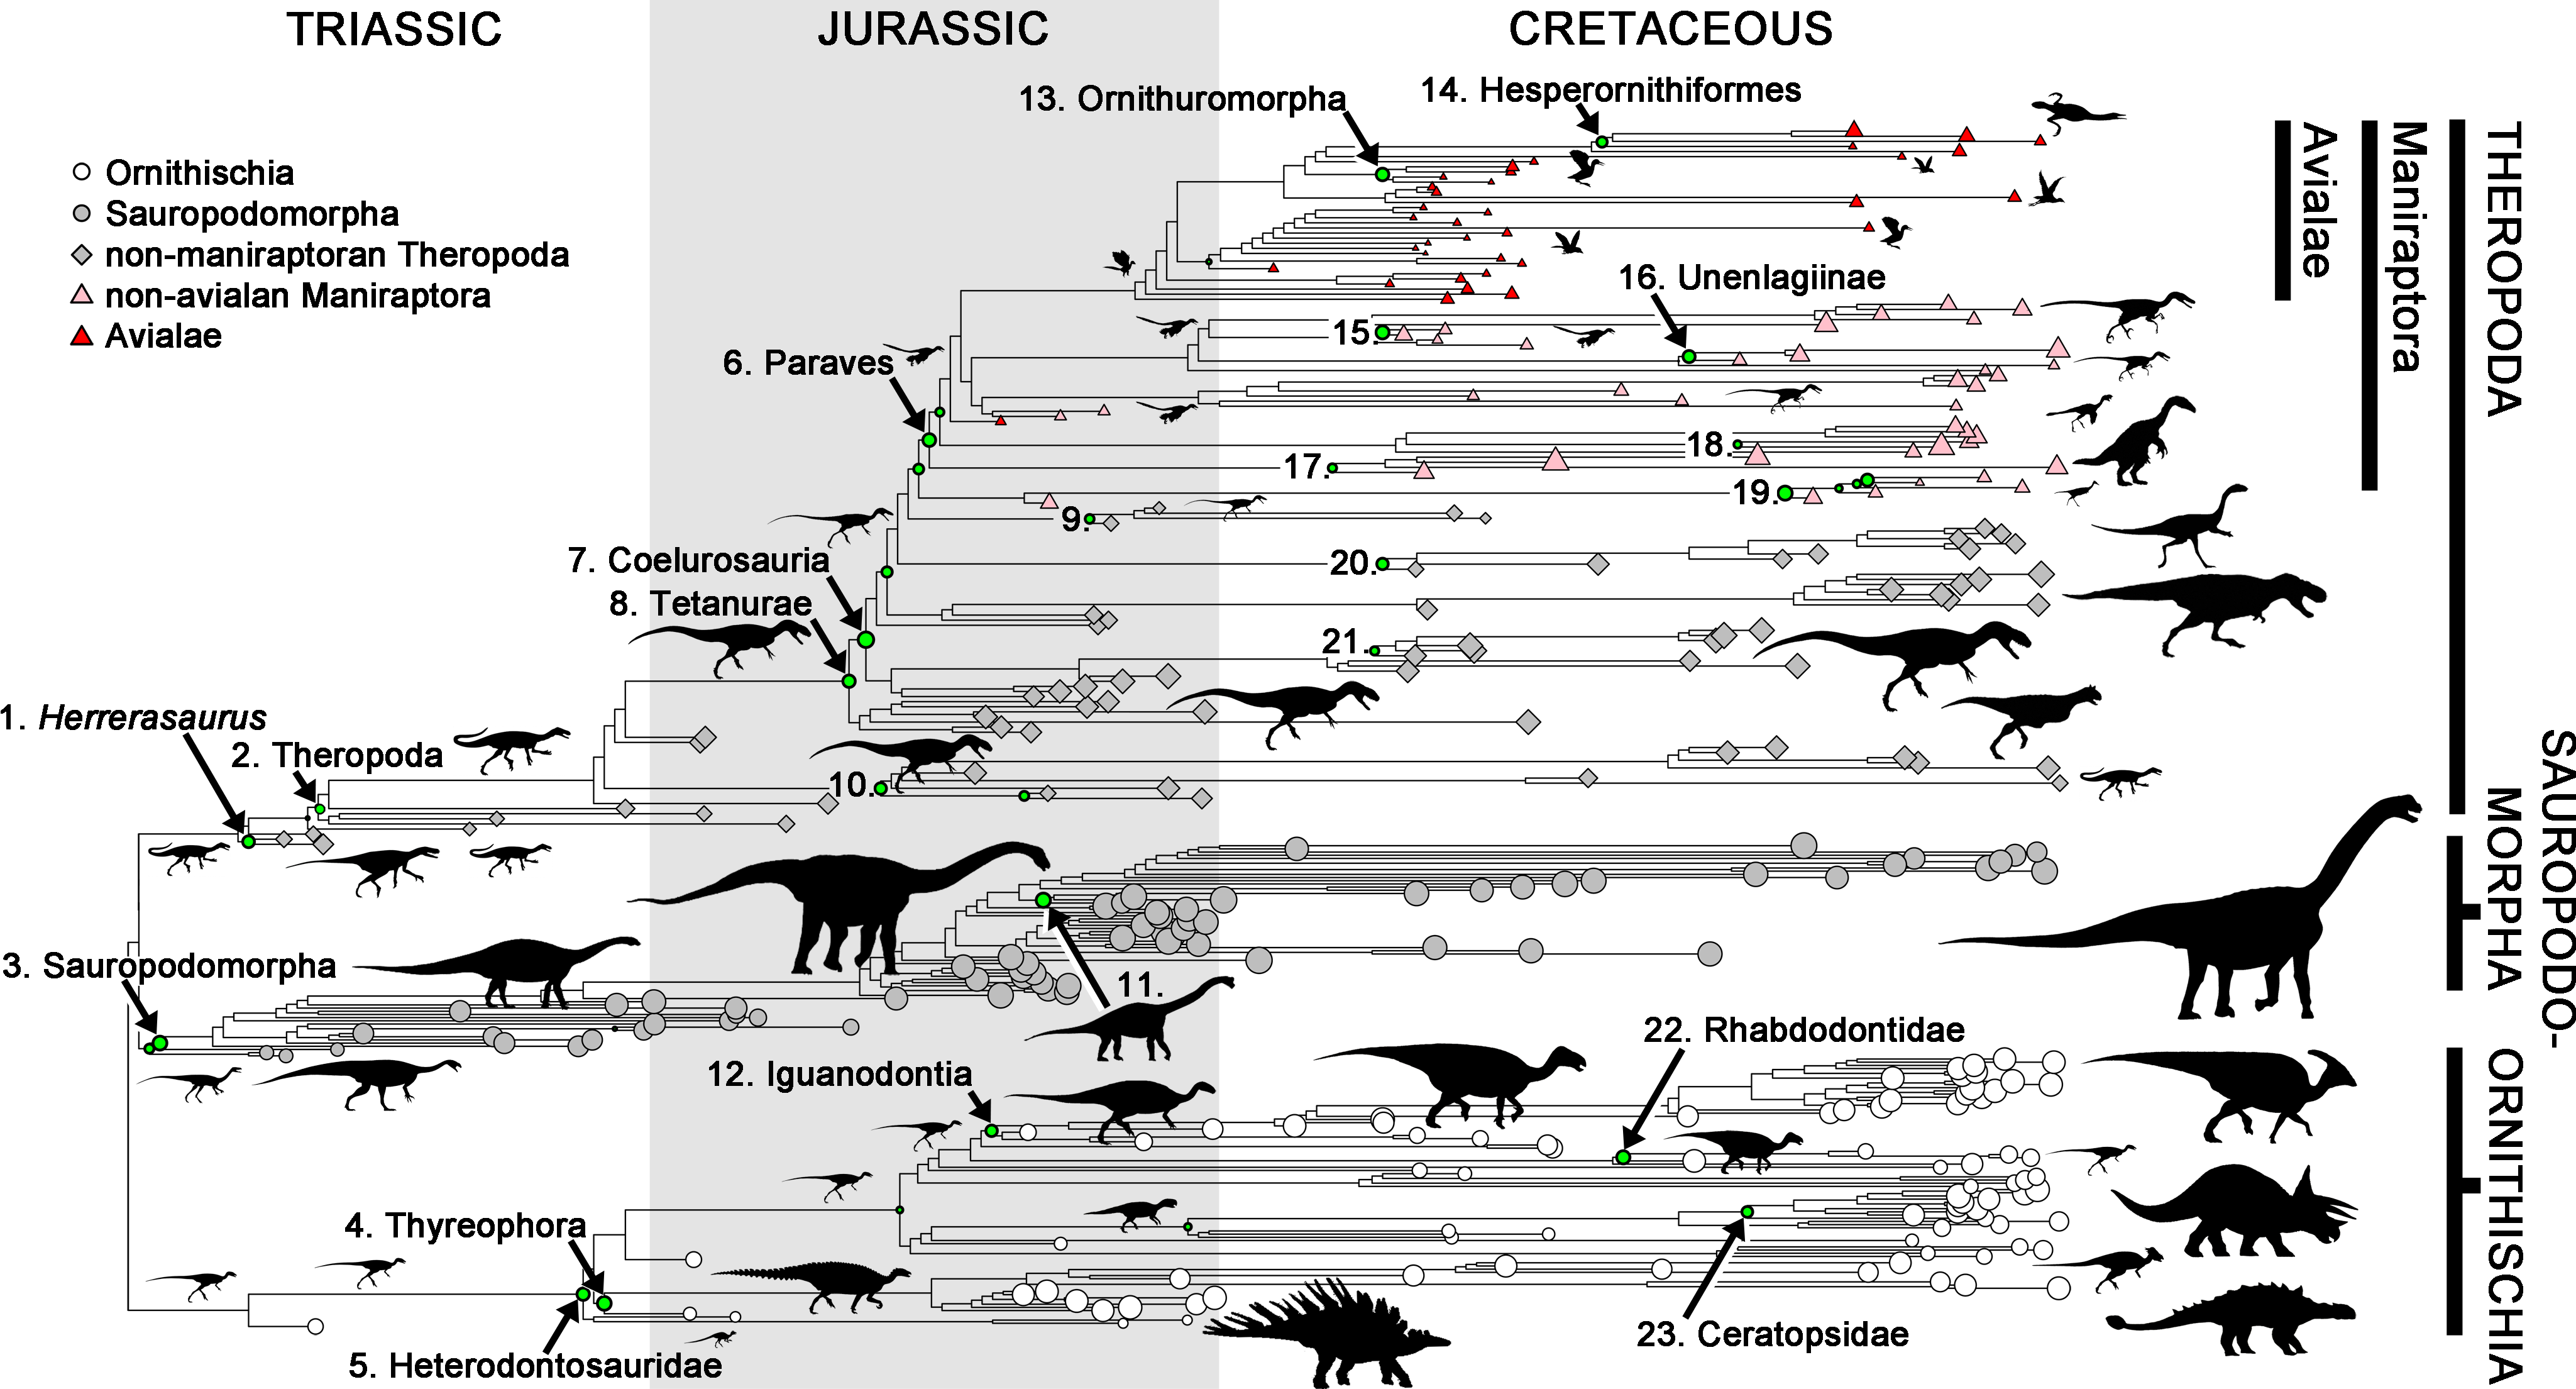 Dinosaur%20phylogeny%20showing%20nodes%20with%20exceptional%20rates%20of%20body%20size%20evolution.png